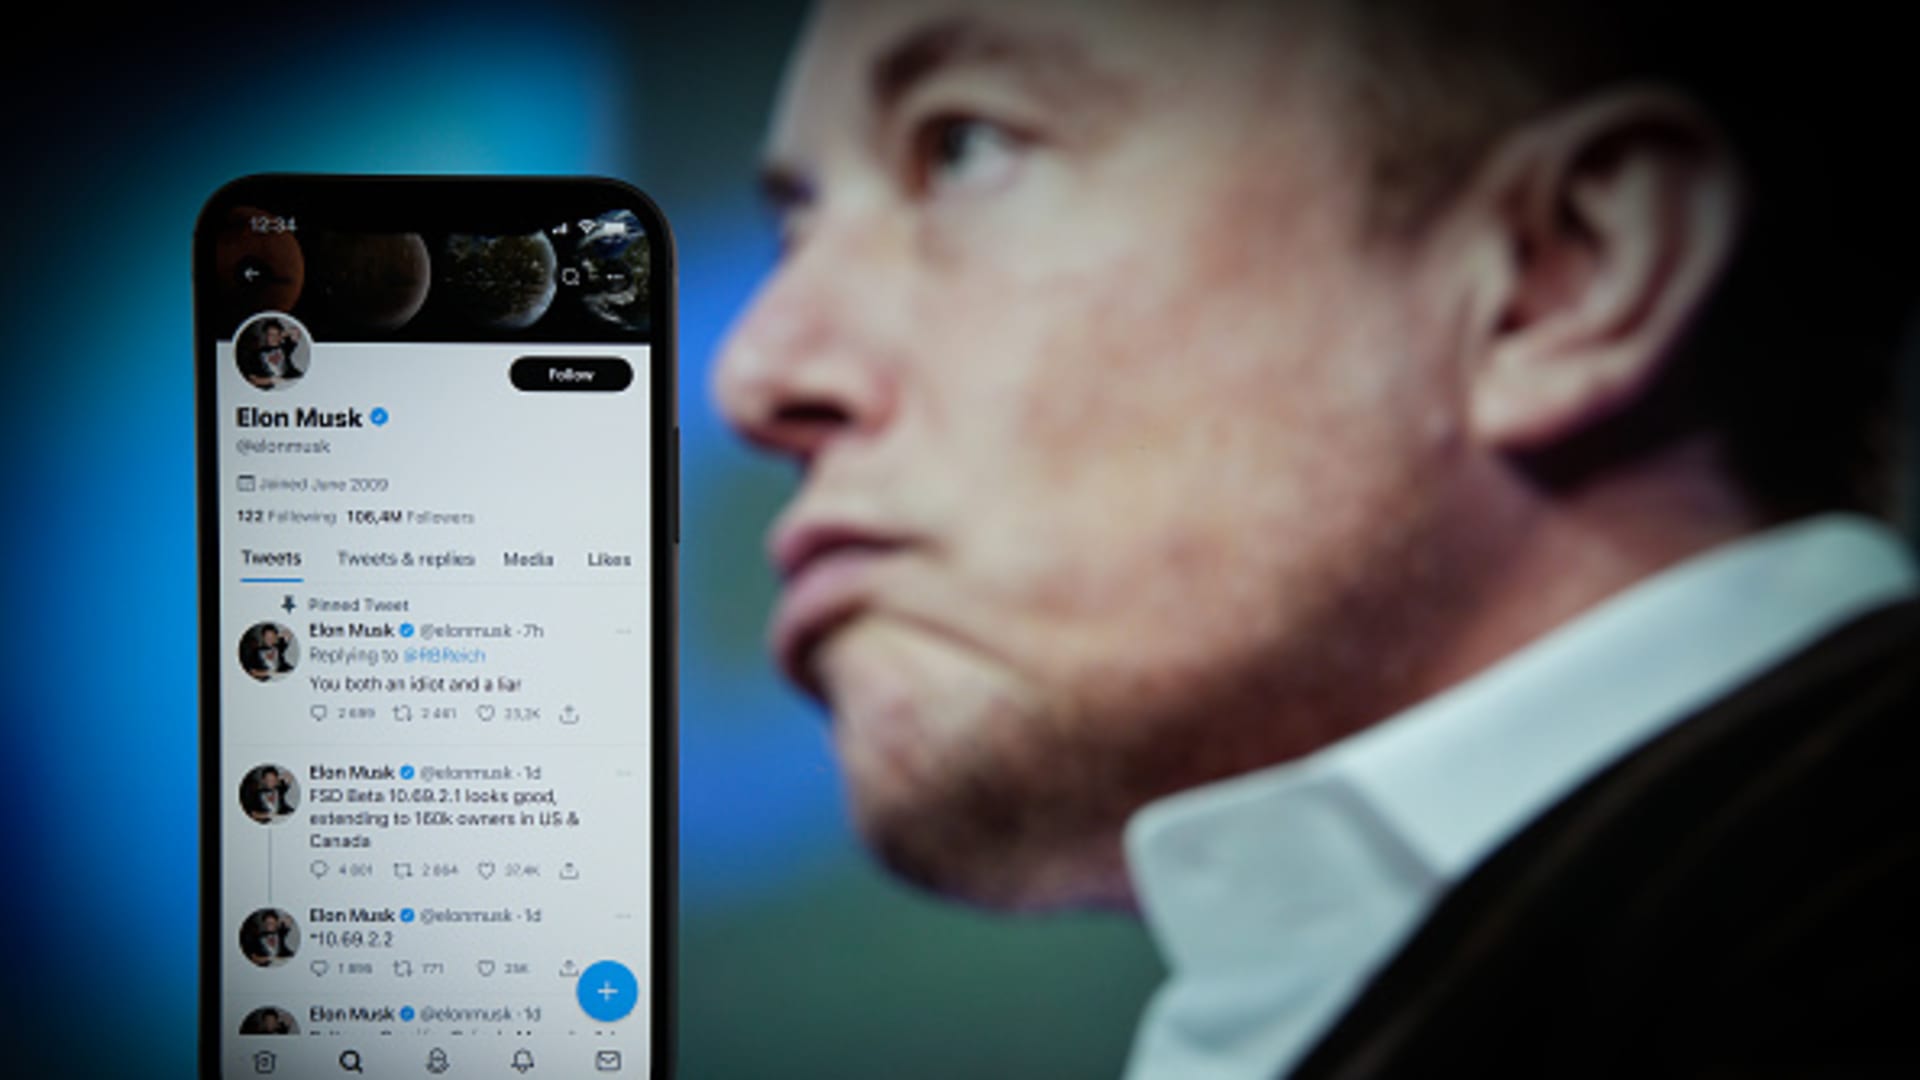 Twitter surges on report Musk plans to go through with deal